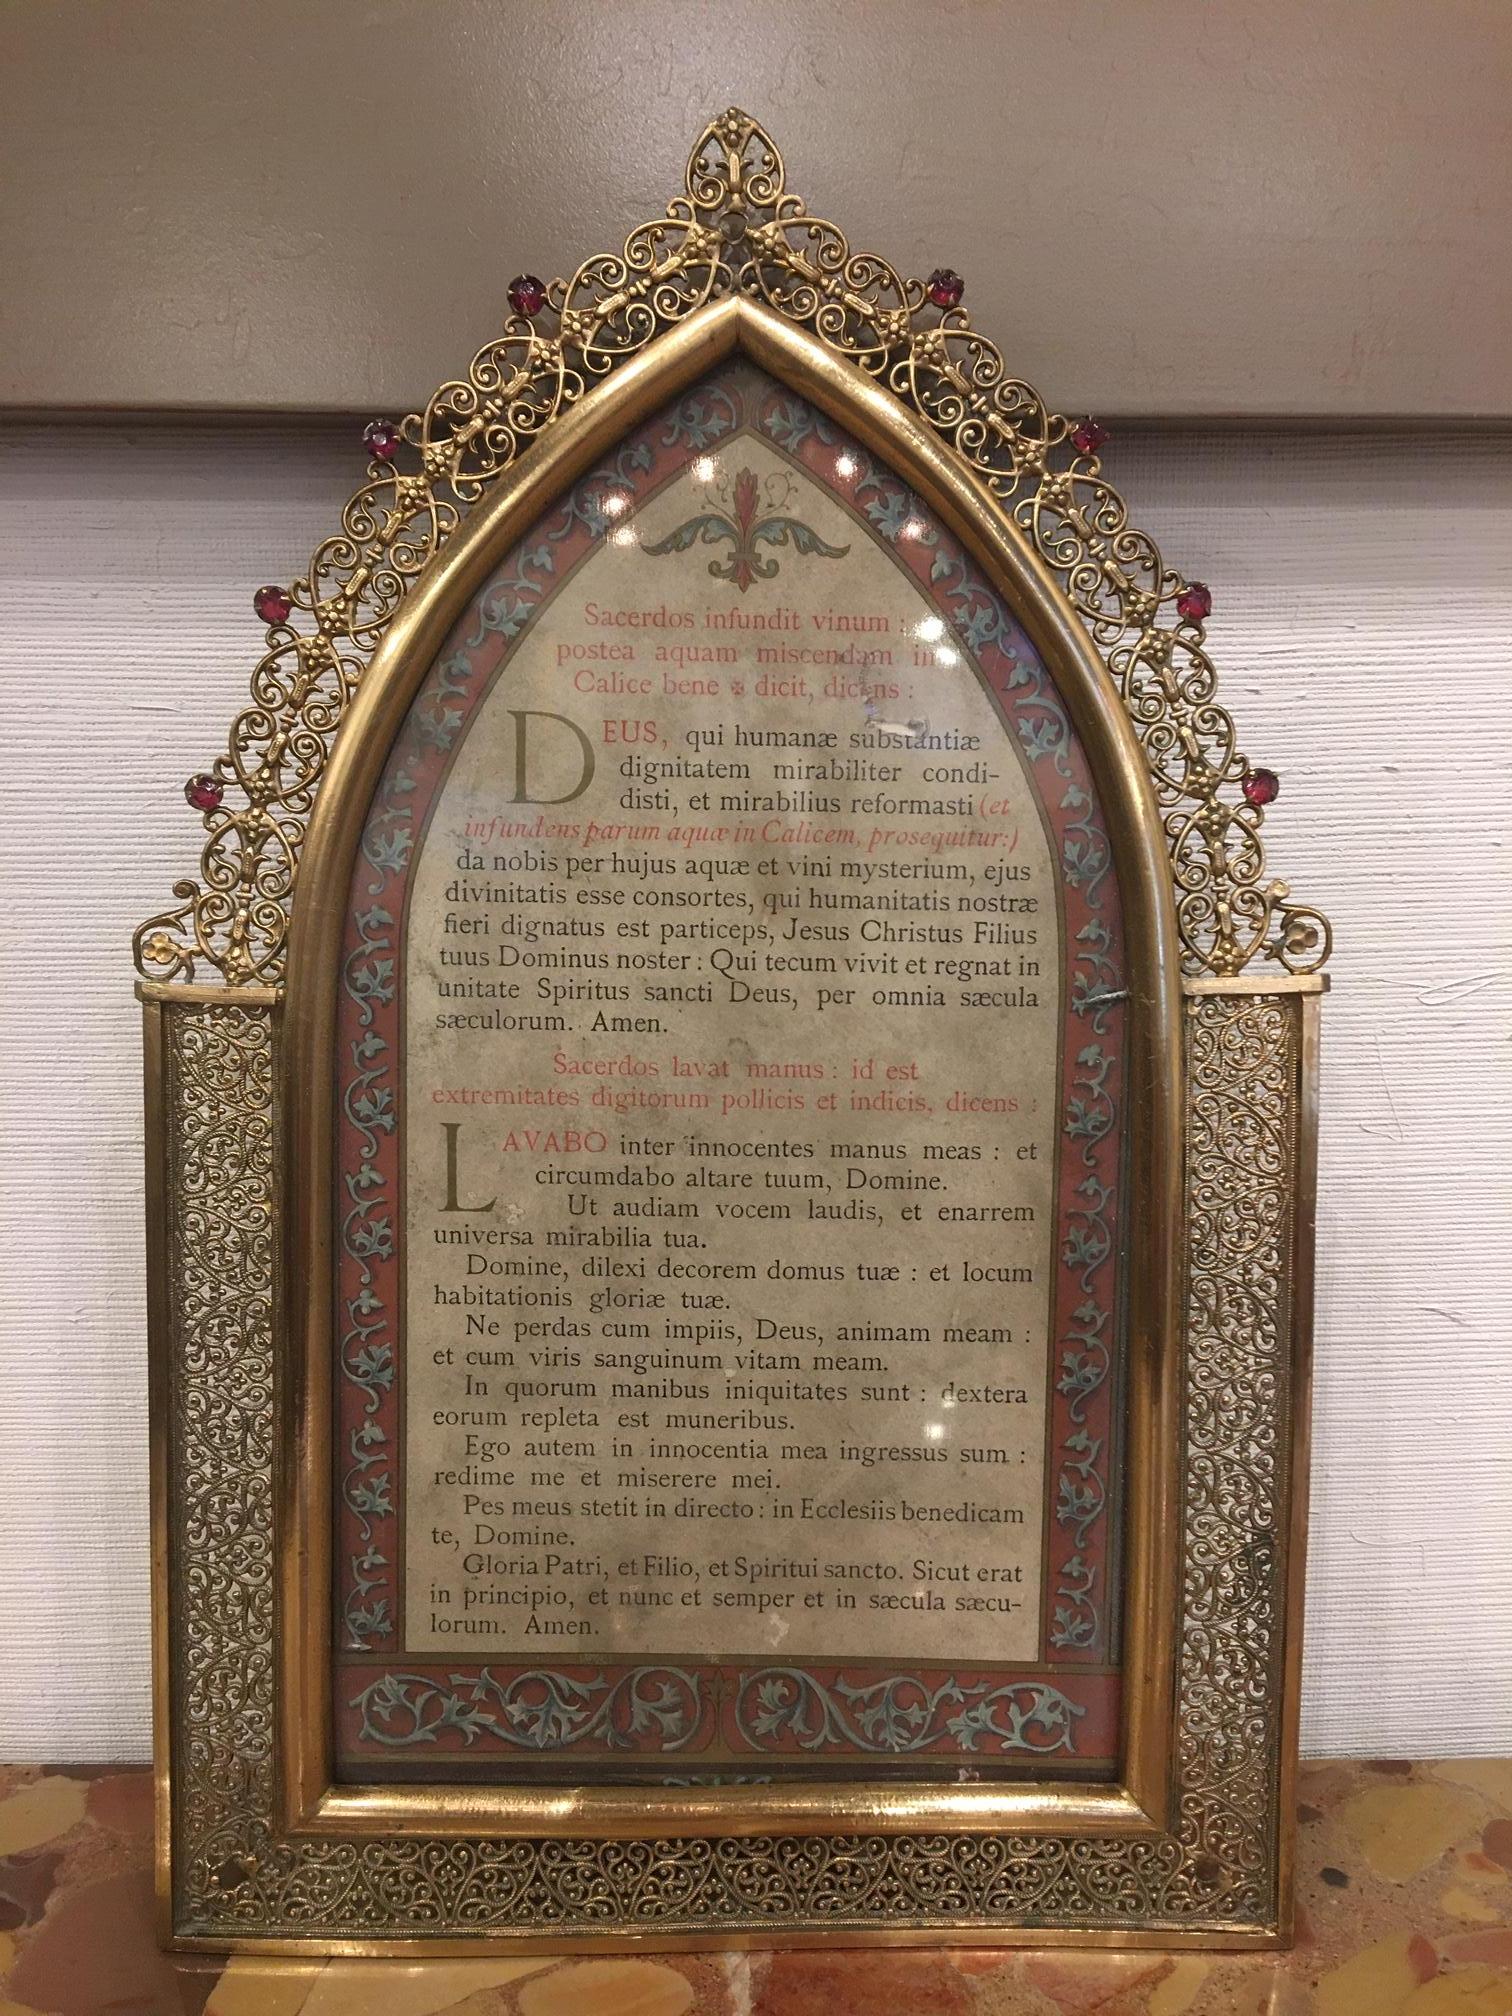 Polished brass picture frame with decorative trim around, 19th century. Wording is in Latin.